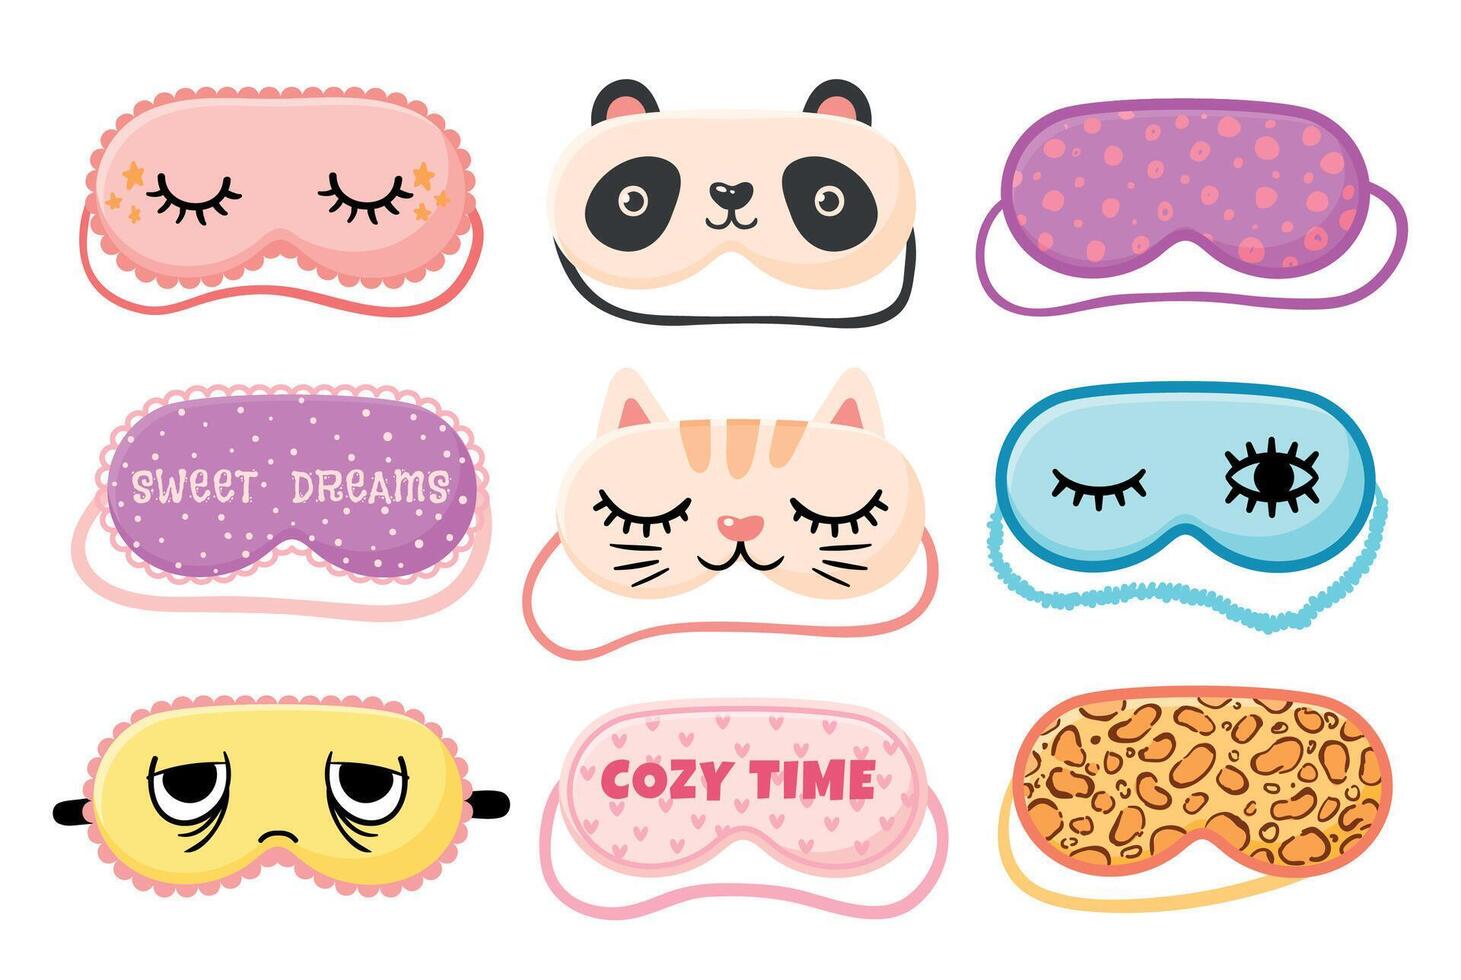 Masks for dreaming with eyes and smile collection vector